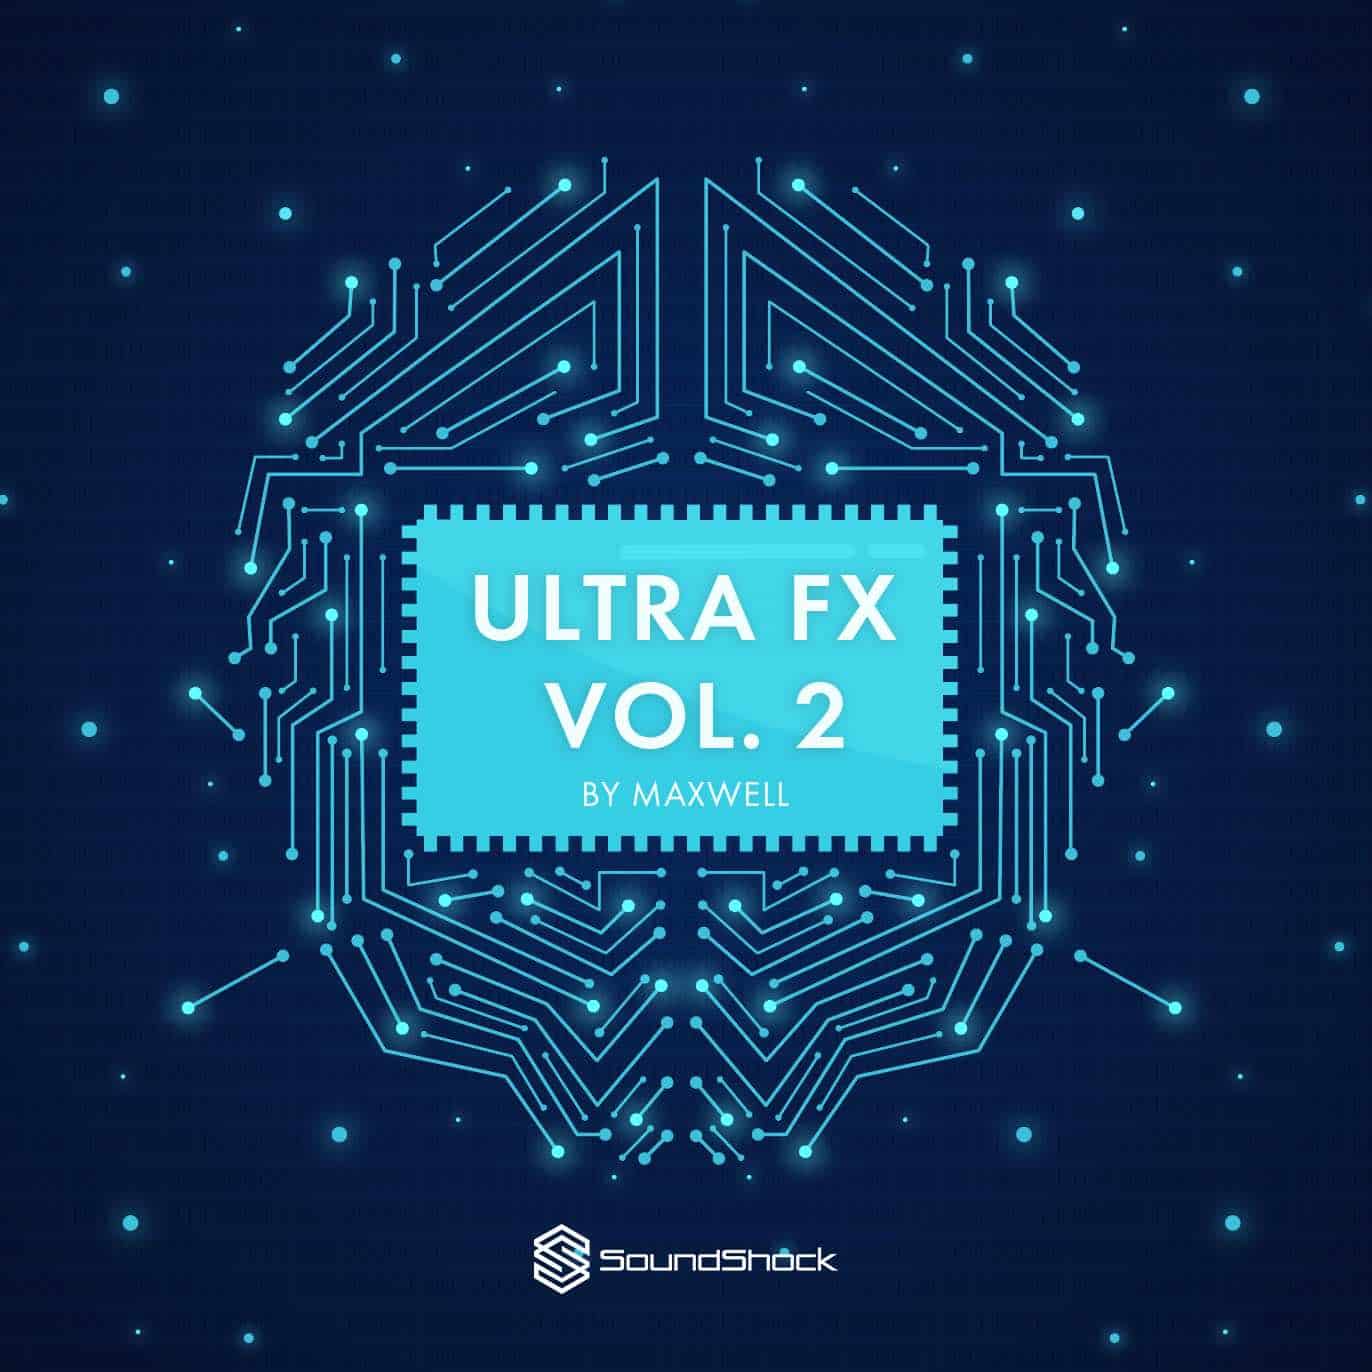 Ultra FX Vol 2 offers a collection of stunning visual effects.